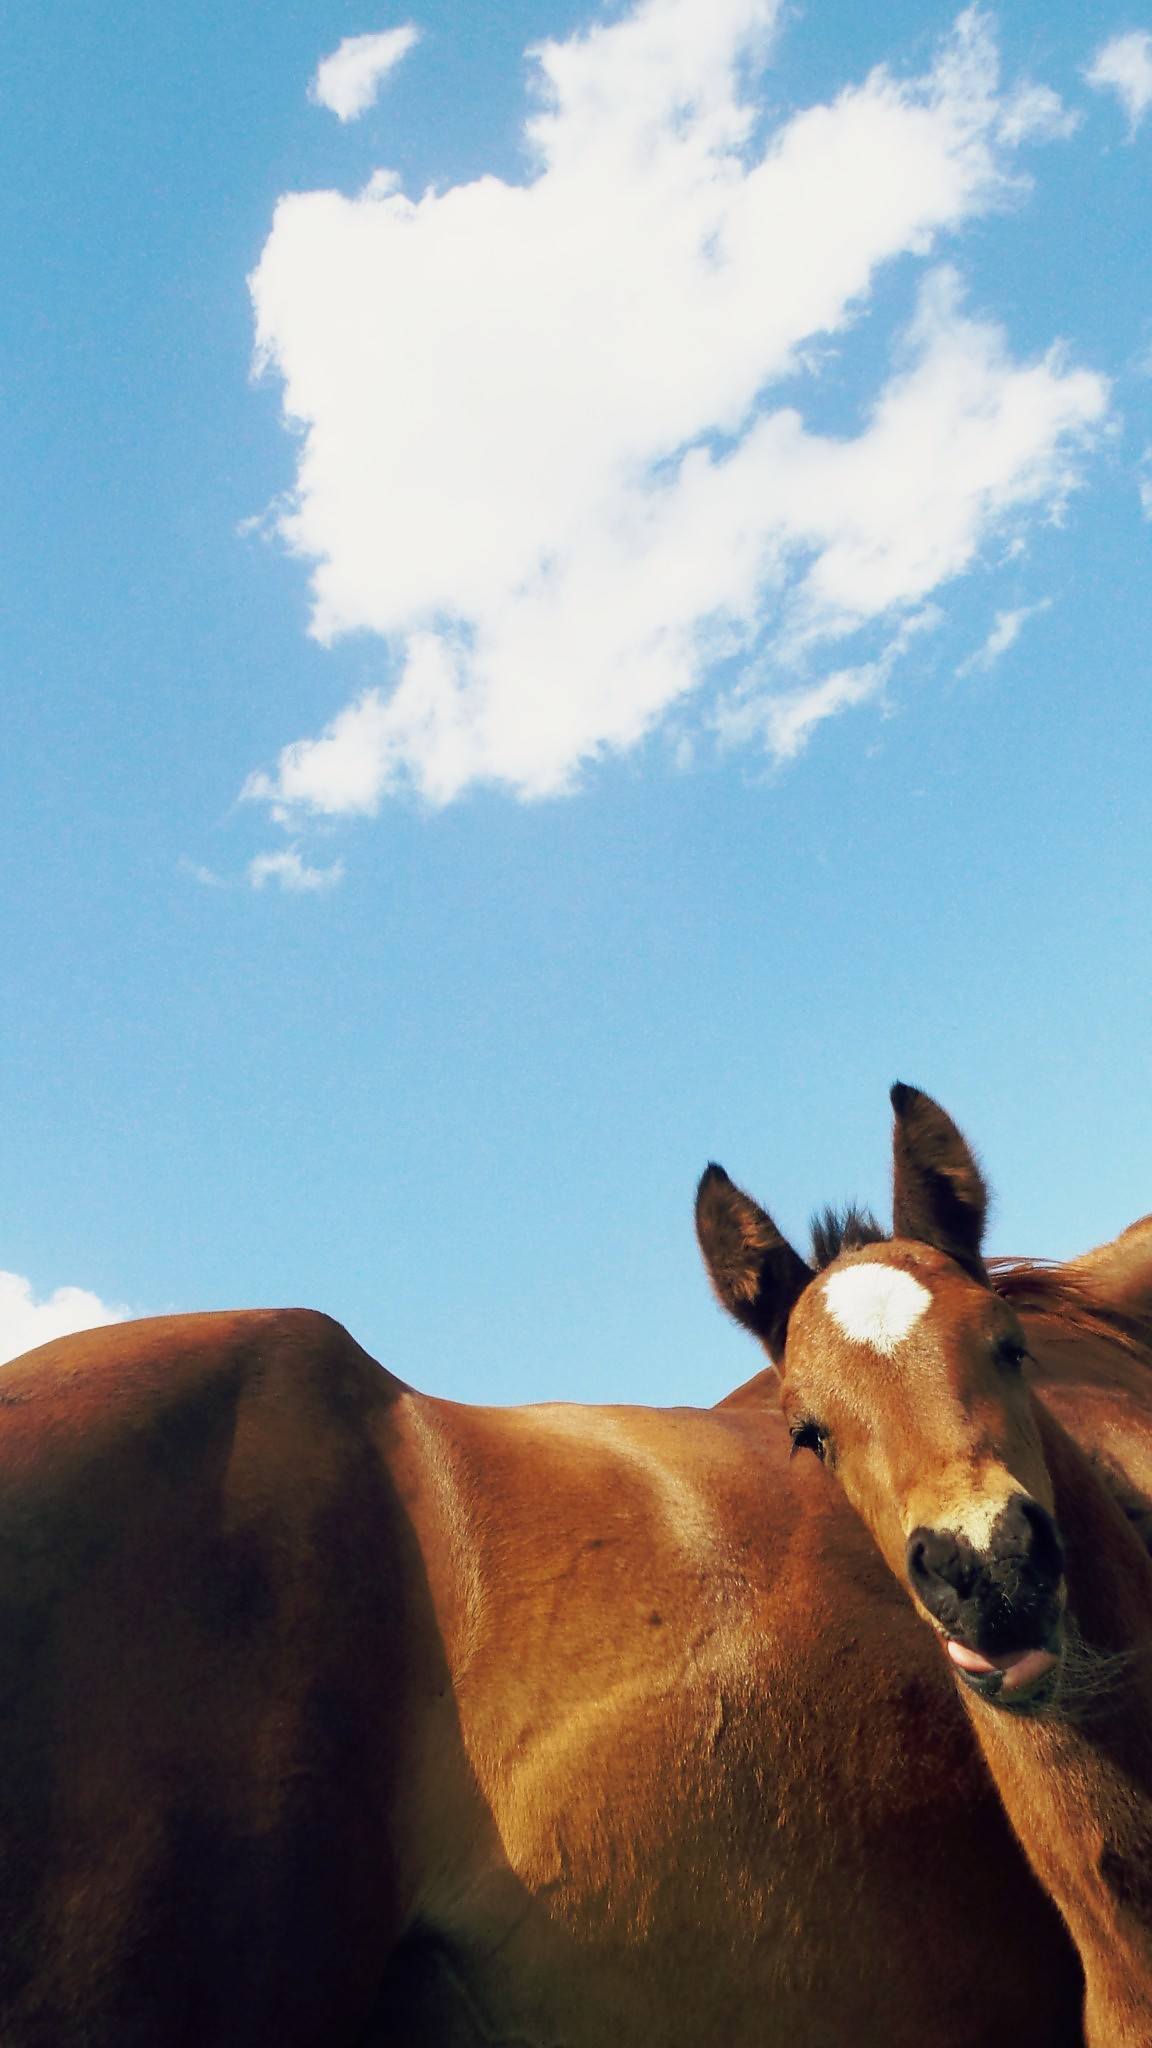 Your horse’s well-being and medical procedures